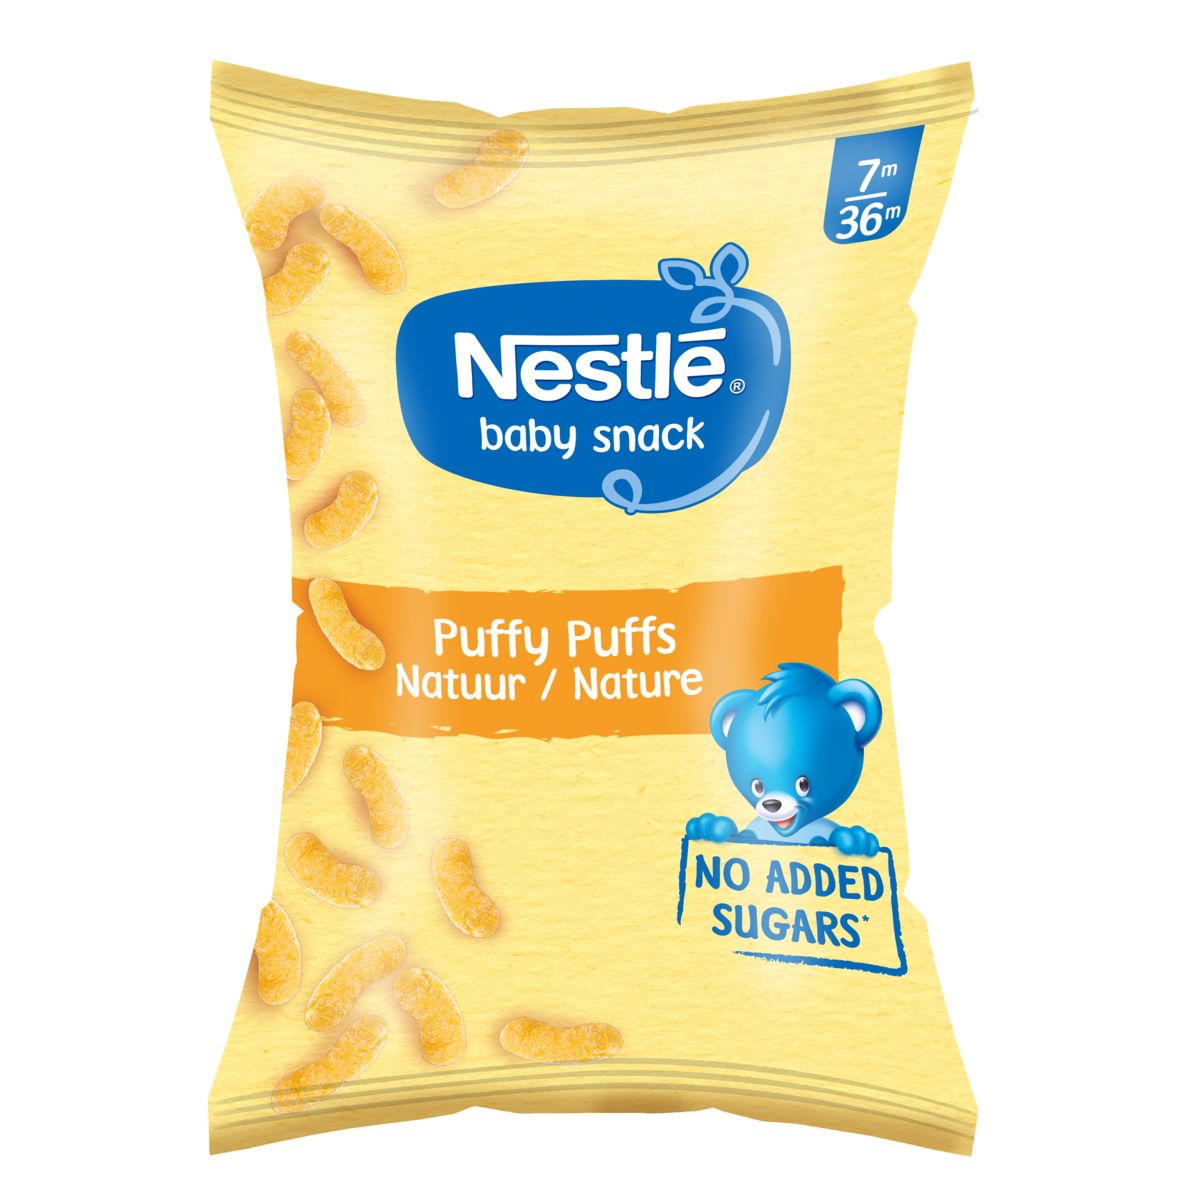 Nestlé Baby Snack Puffy Puffs Nature dès 7mois  (28g)